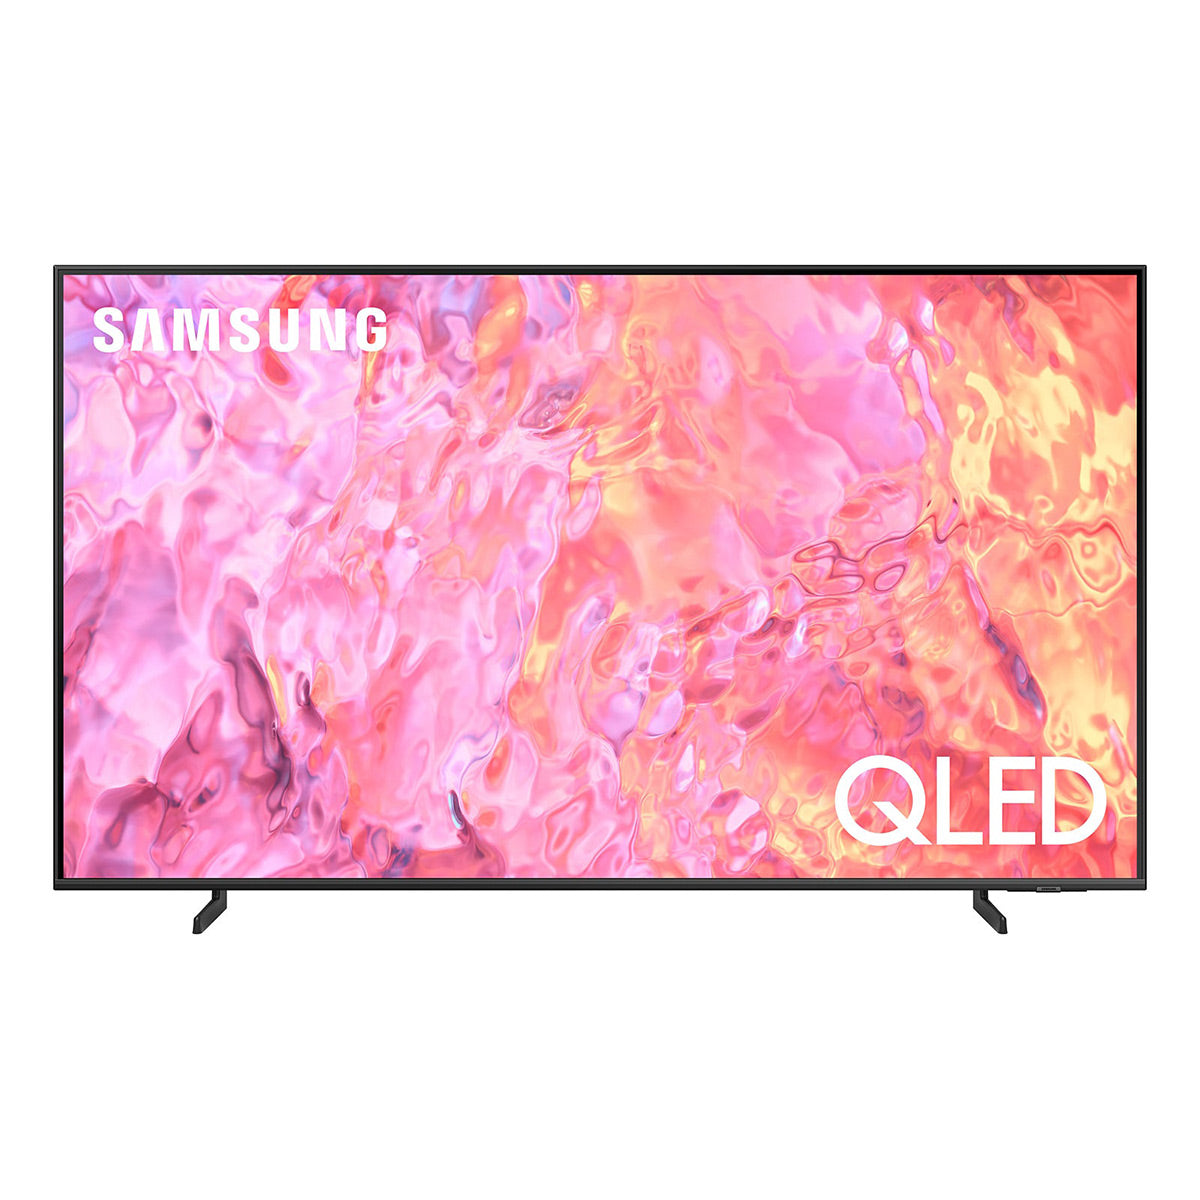 Samsung QN55Q60CA 55" QLED 4K Smart TV with Quantum HDR, 100% Color Volume, Dual LED Backlights, & Object Tracking Sound (2023)